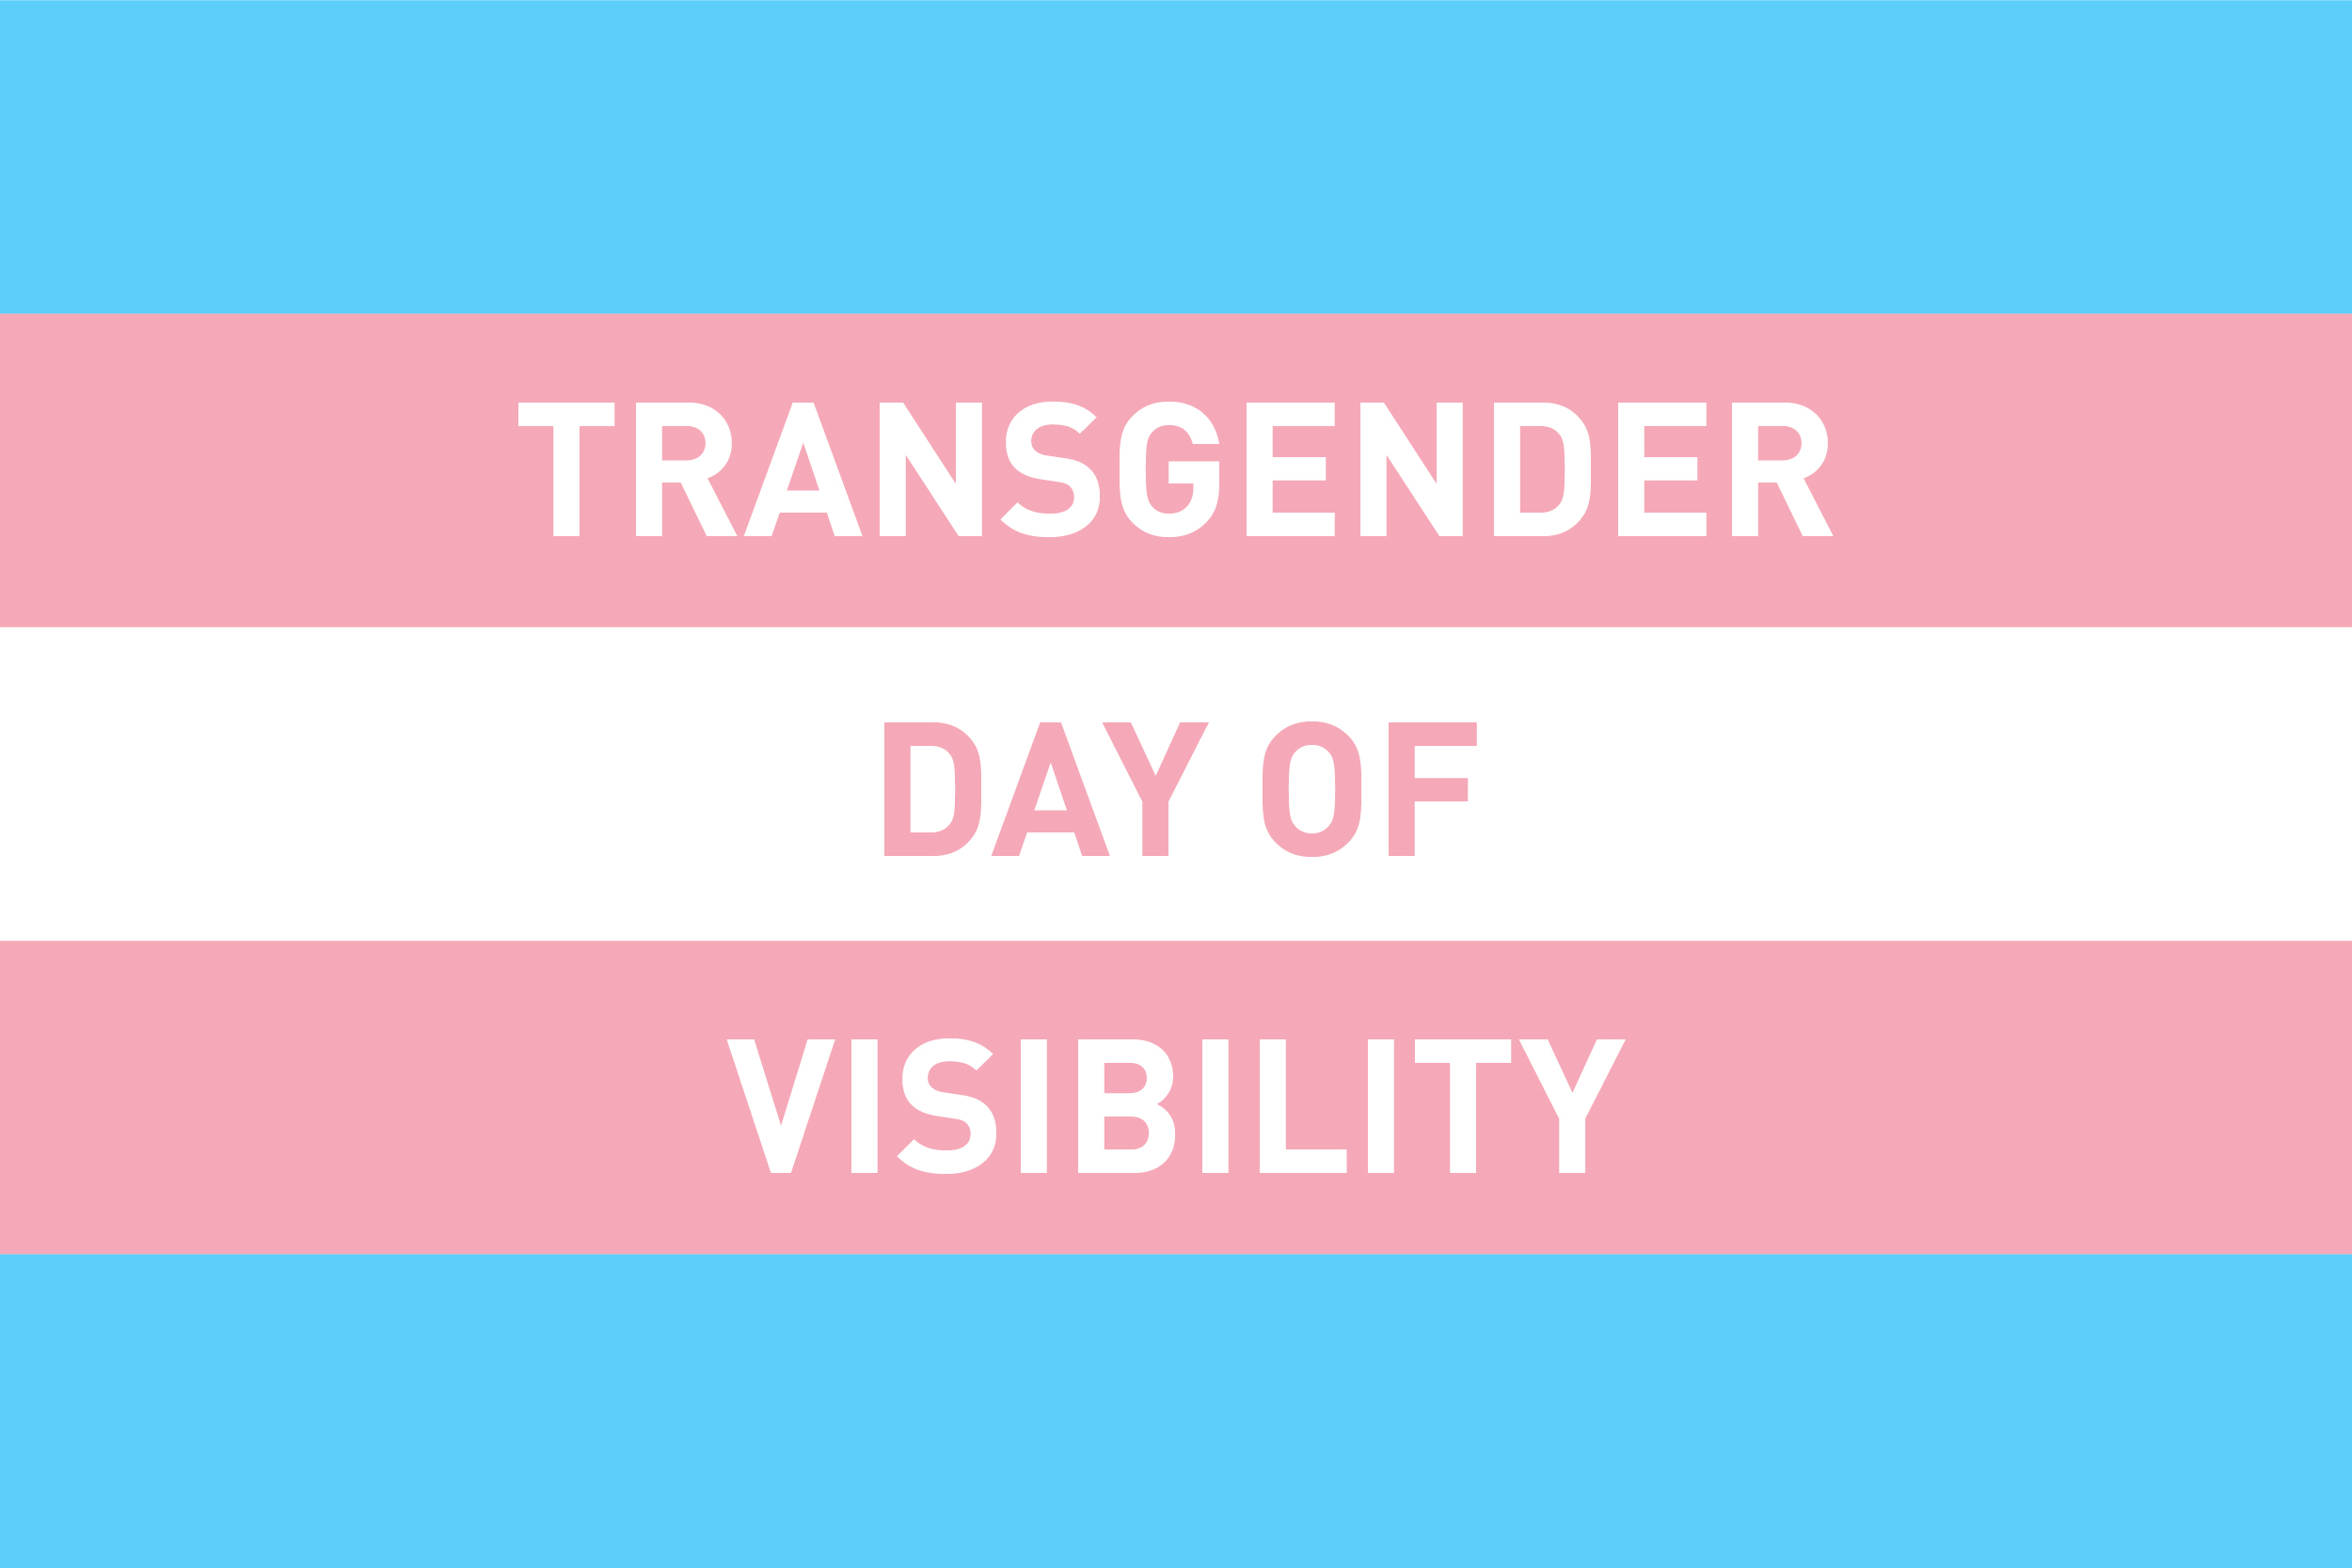 trans visibility day 2019